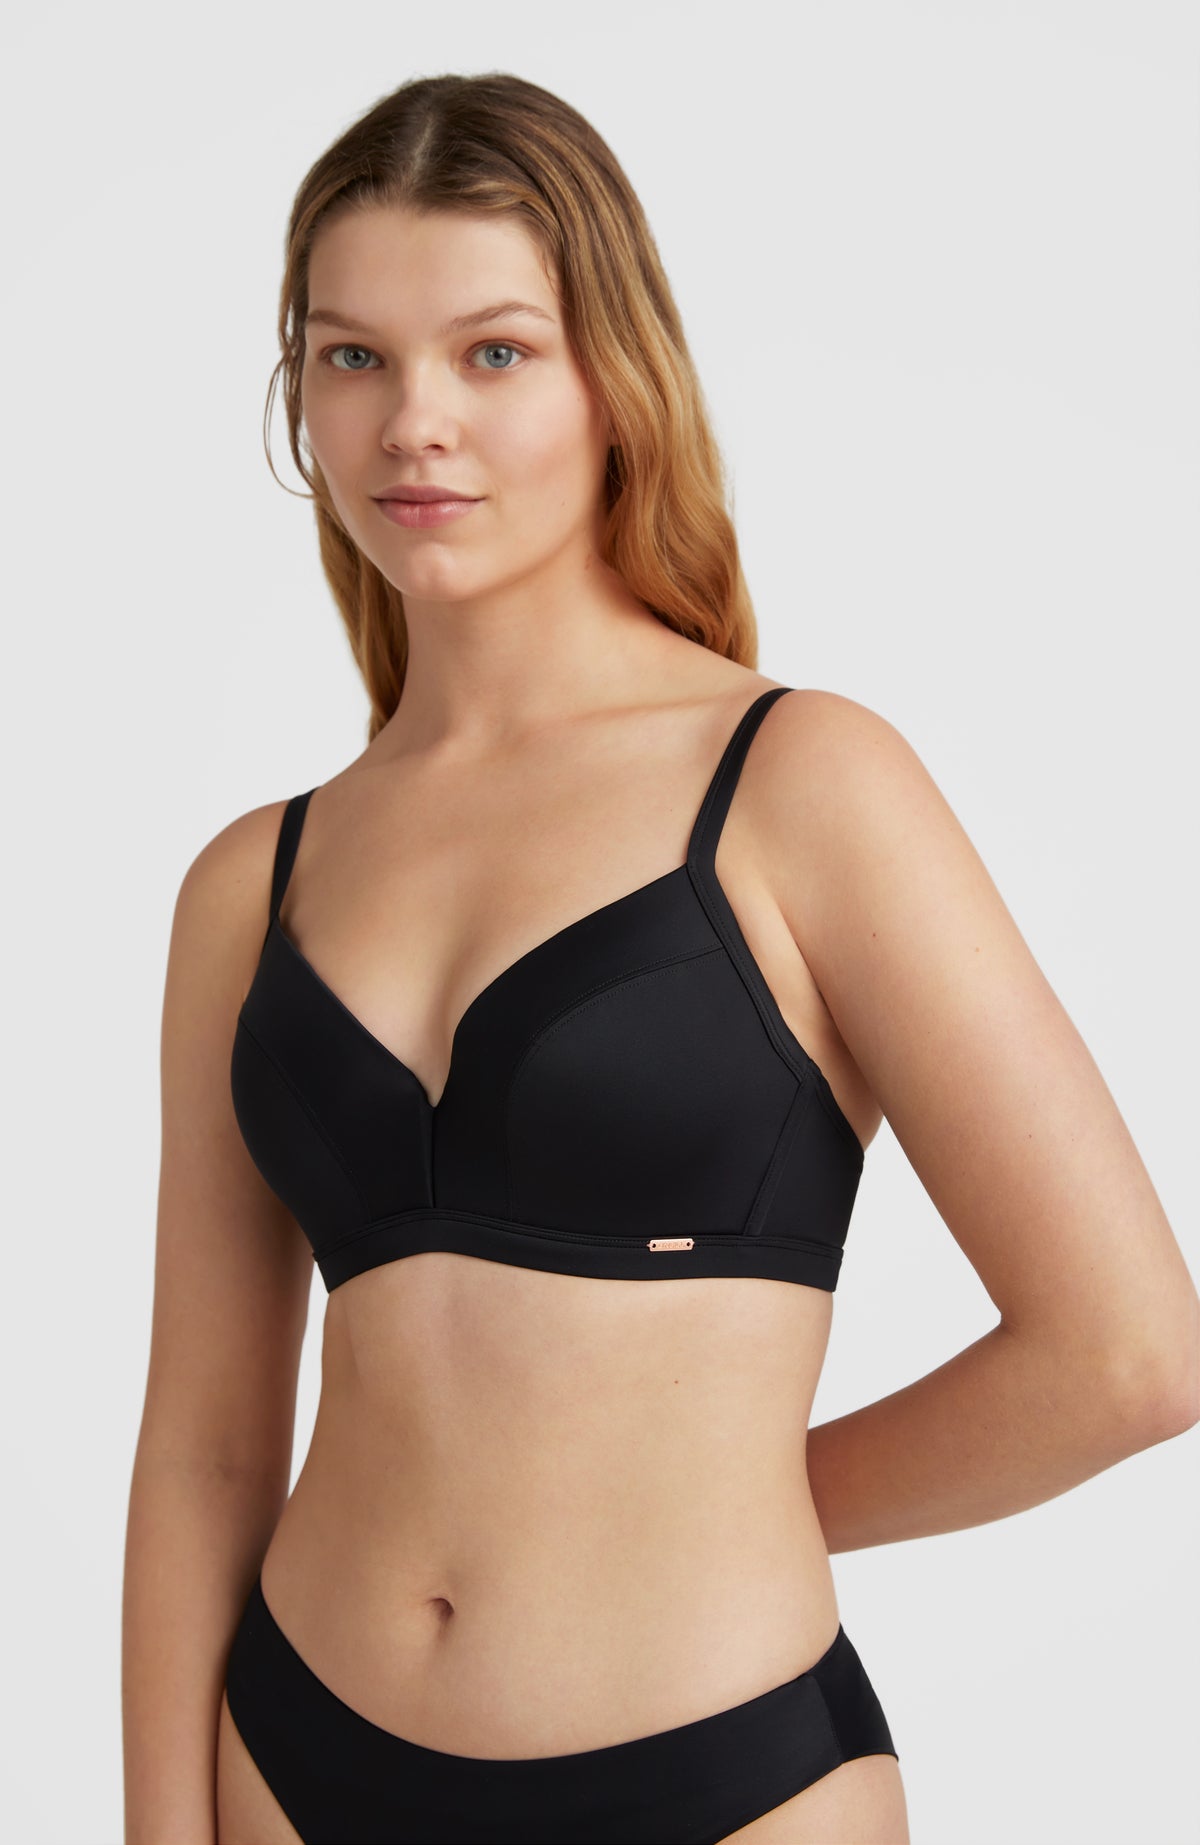 Cacique Size 44B Lightly Lined Tshirt Bra Black - $30 - From Ashley